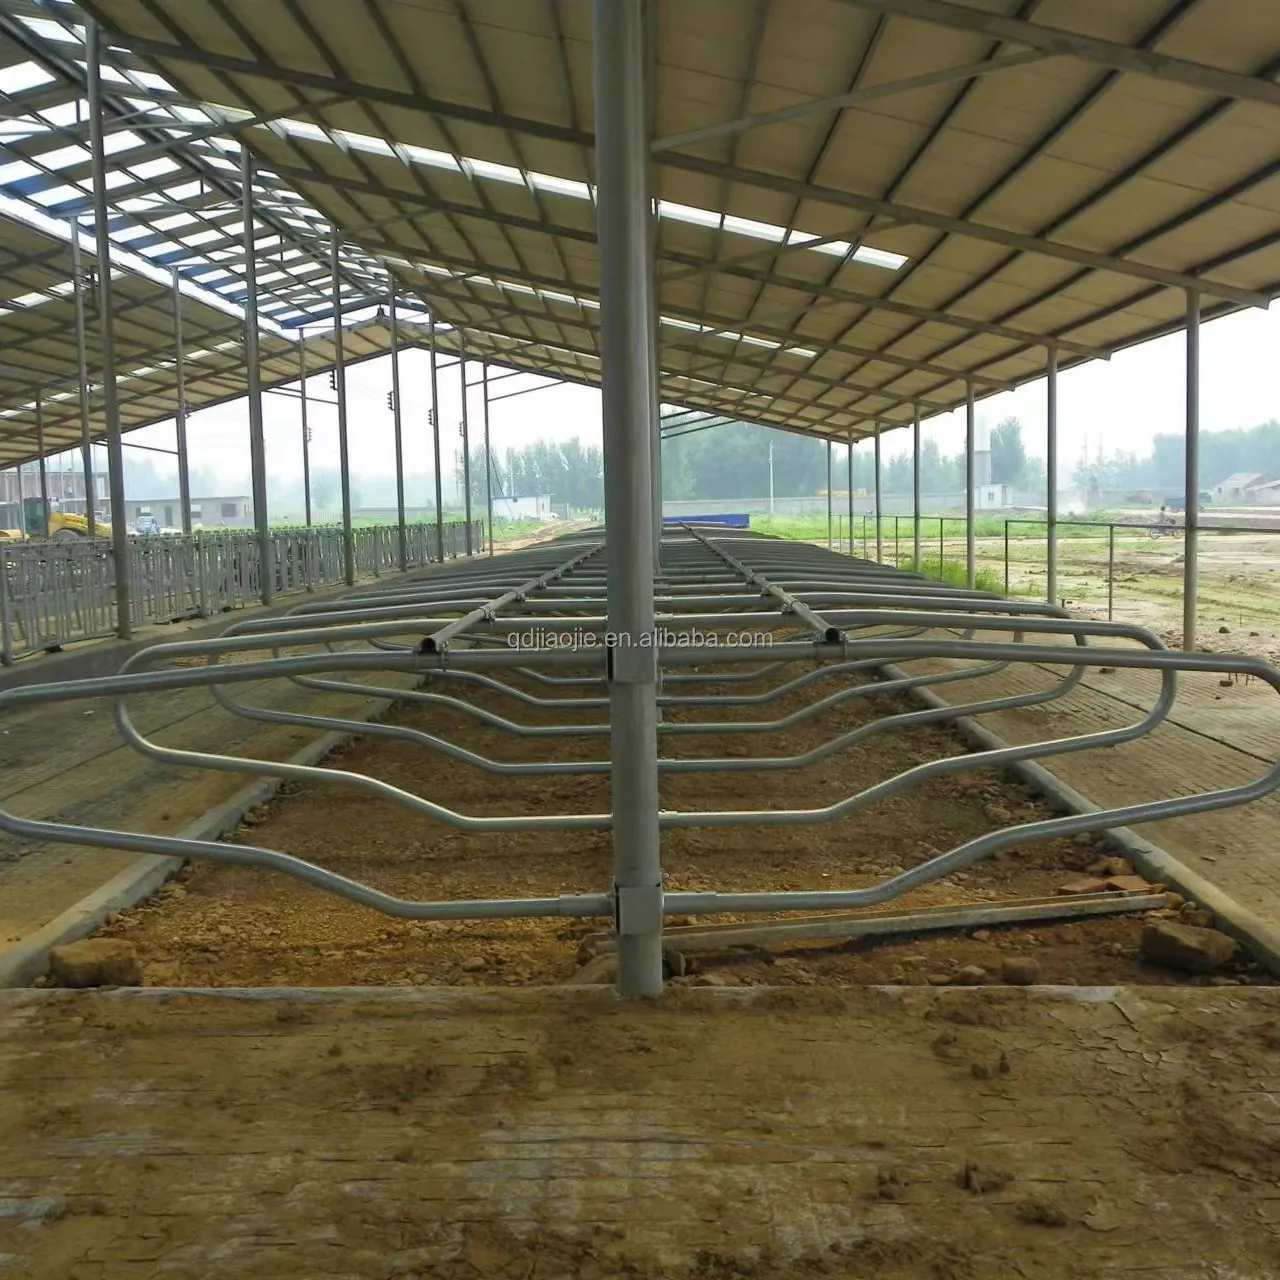 Cattle farm use head to head free stall cattle cubicles cow stalls